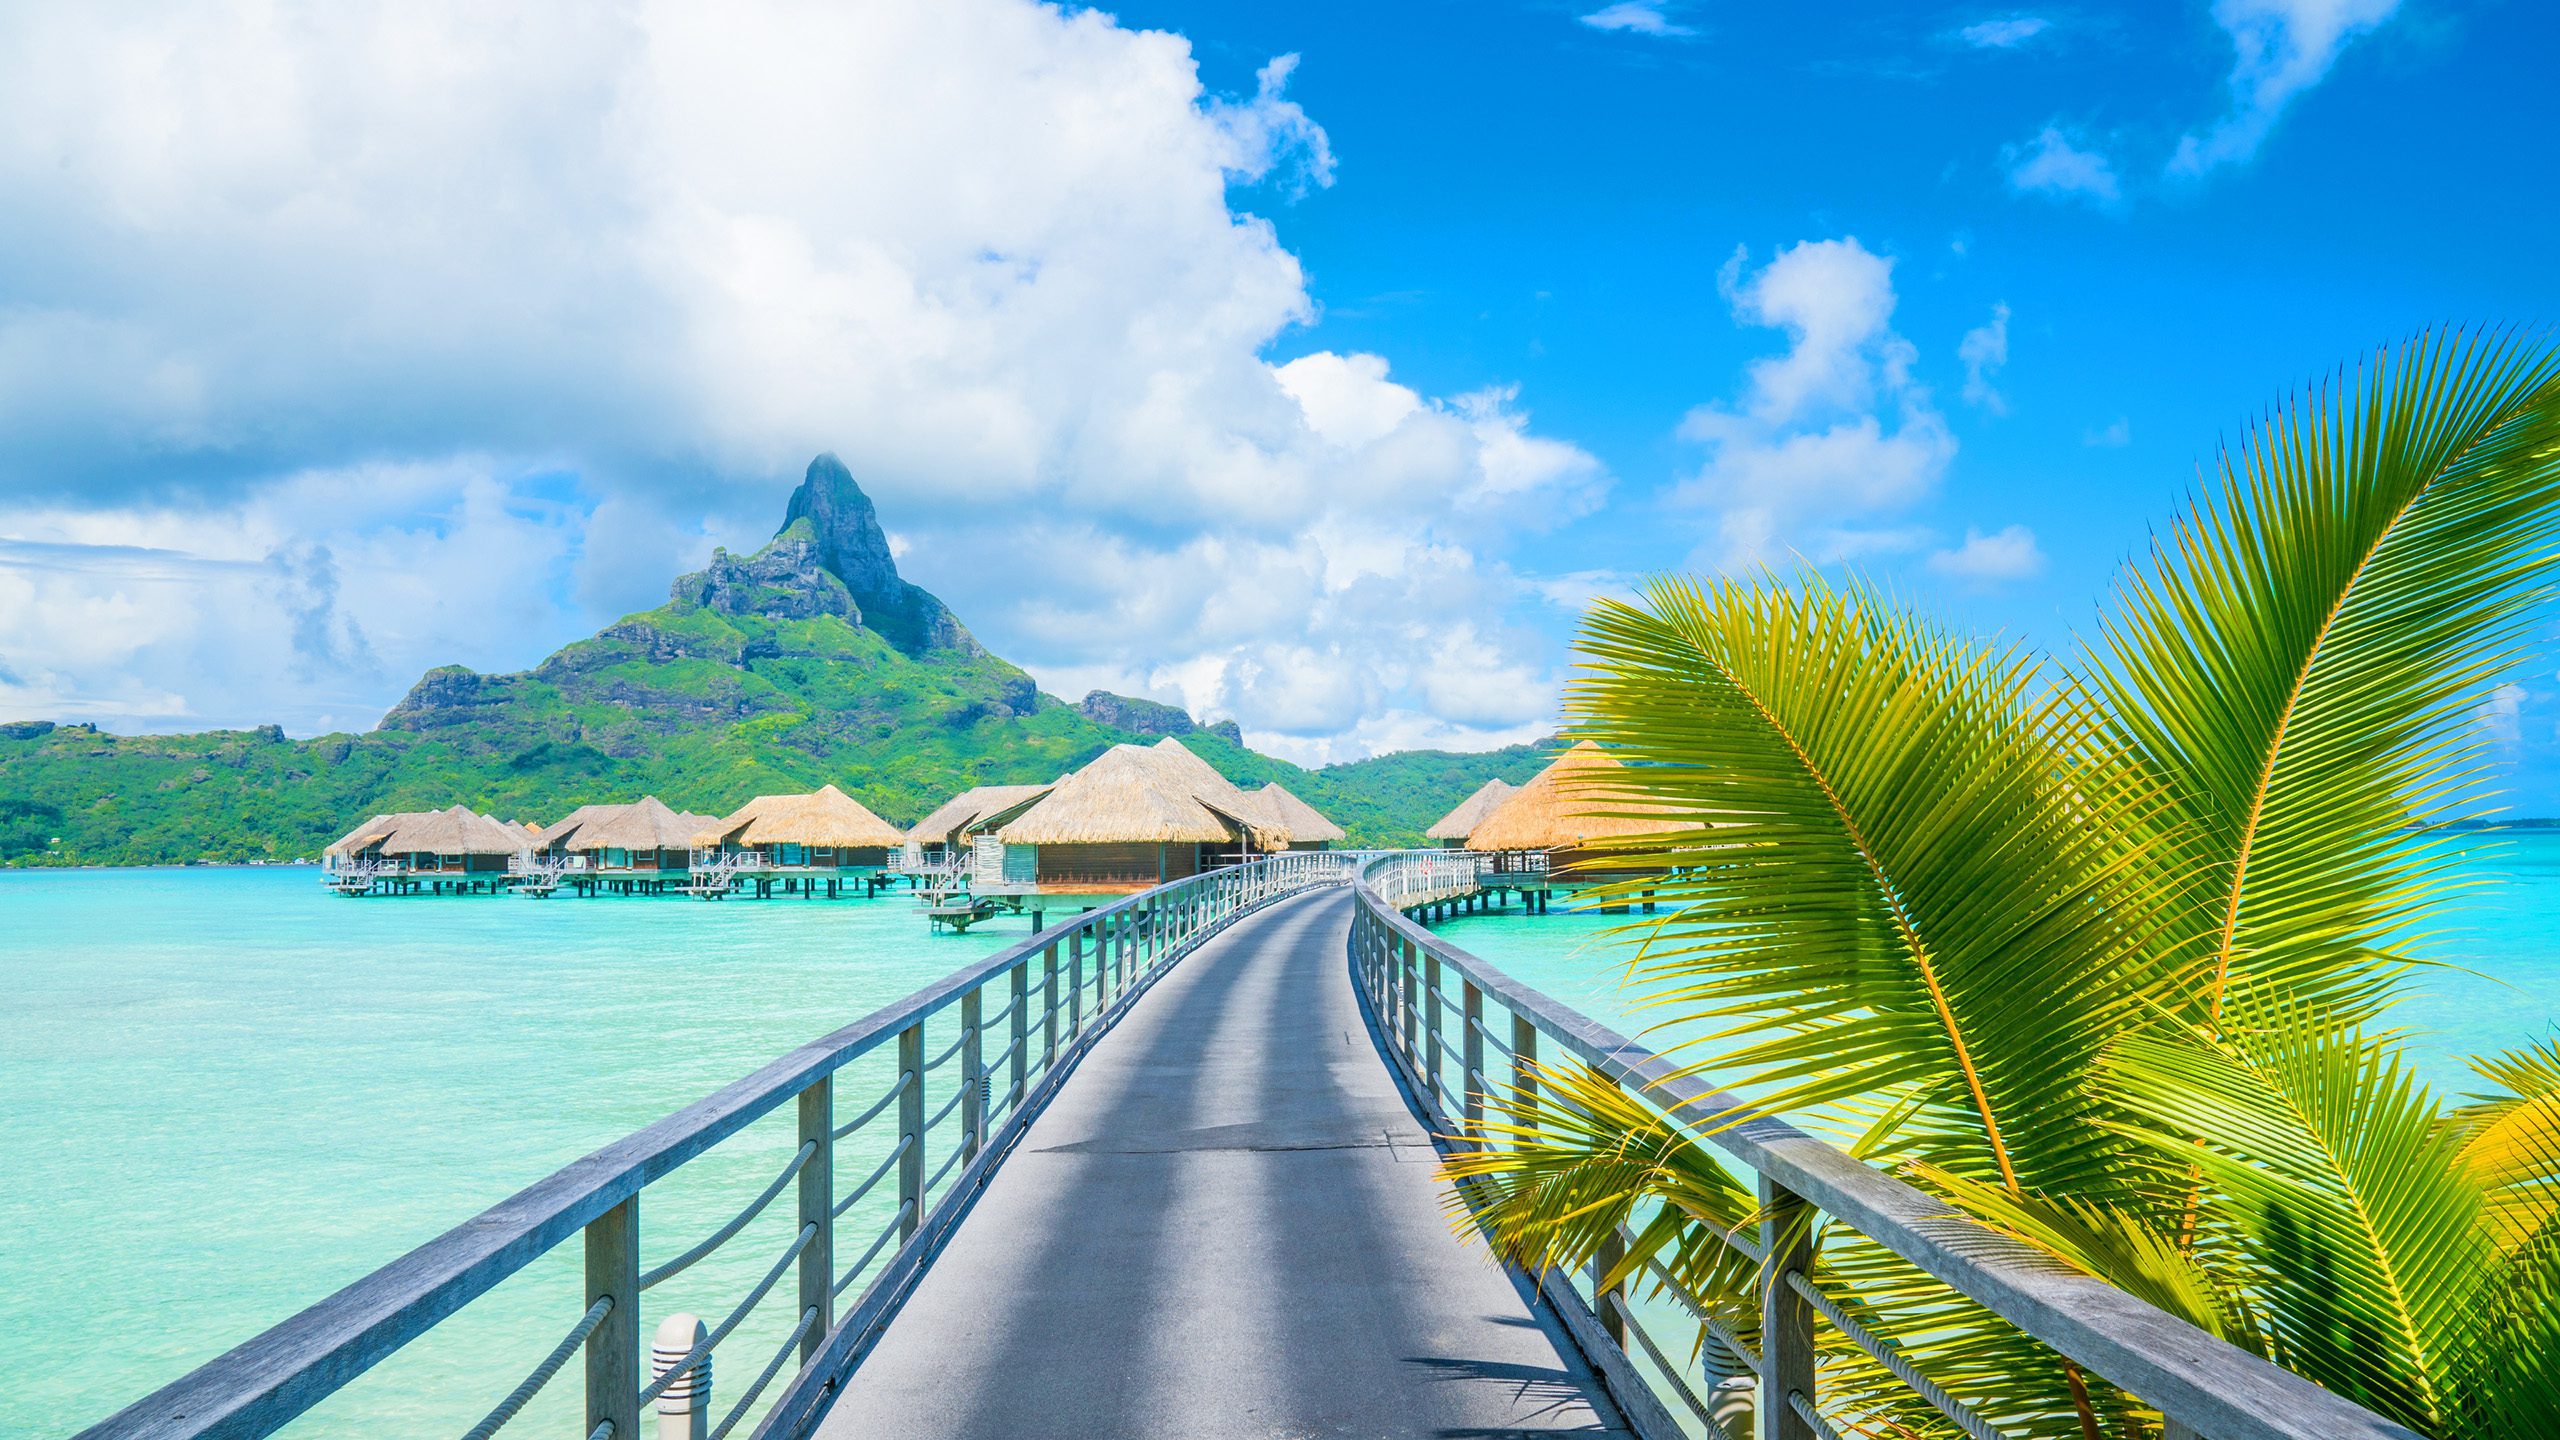 A group of overwater bungalows in Bora Bora | Davidsbeenhere